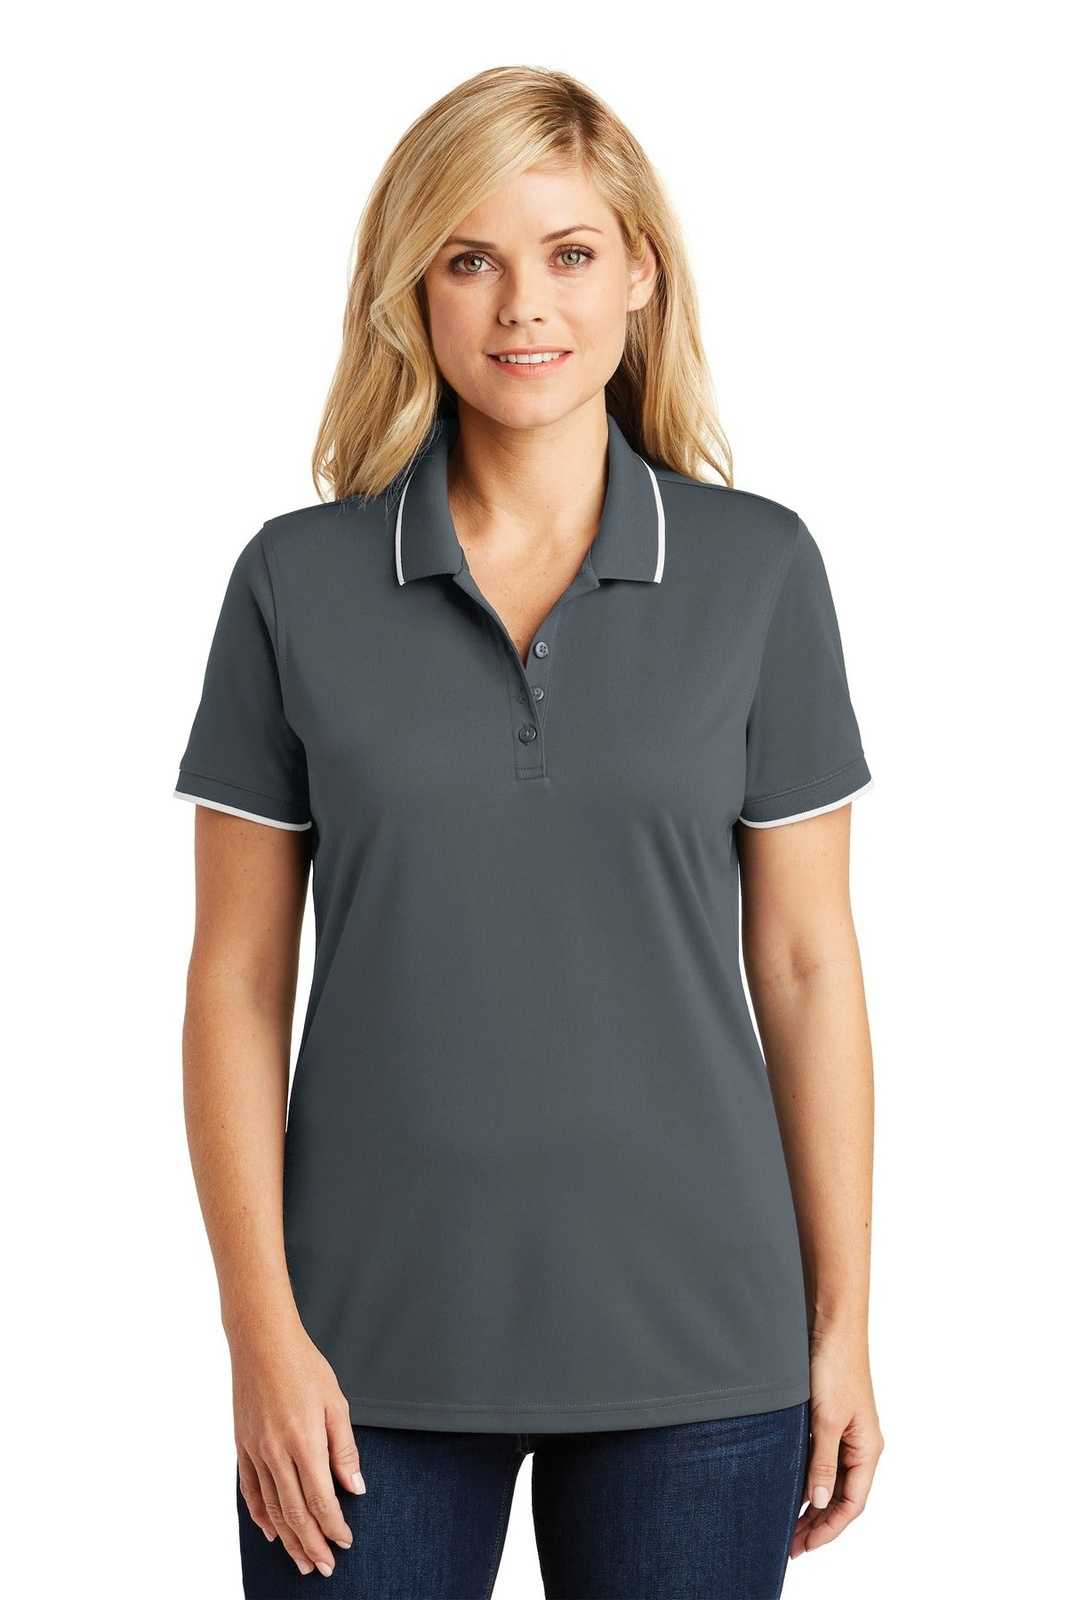 Port Authority LK111 Ladies Dry Zone UV Micro-Mesh Tipped Polo - Graphite White - HIT a Double - 1